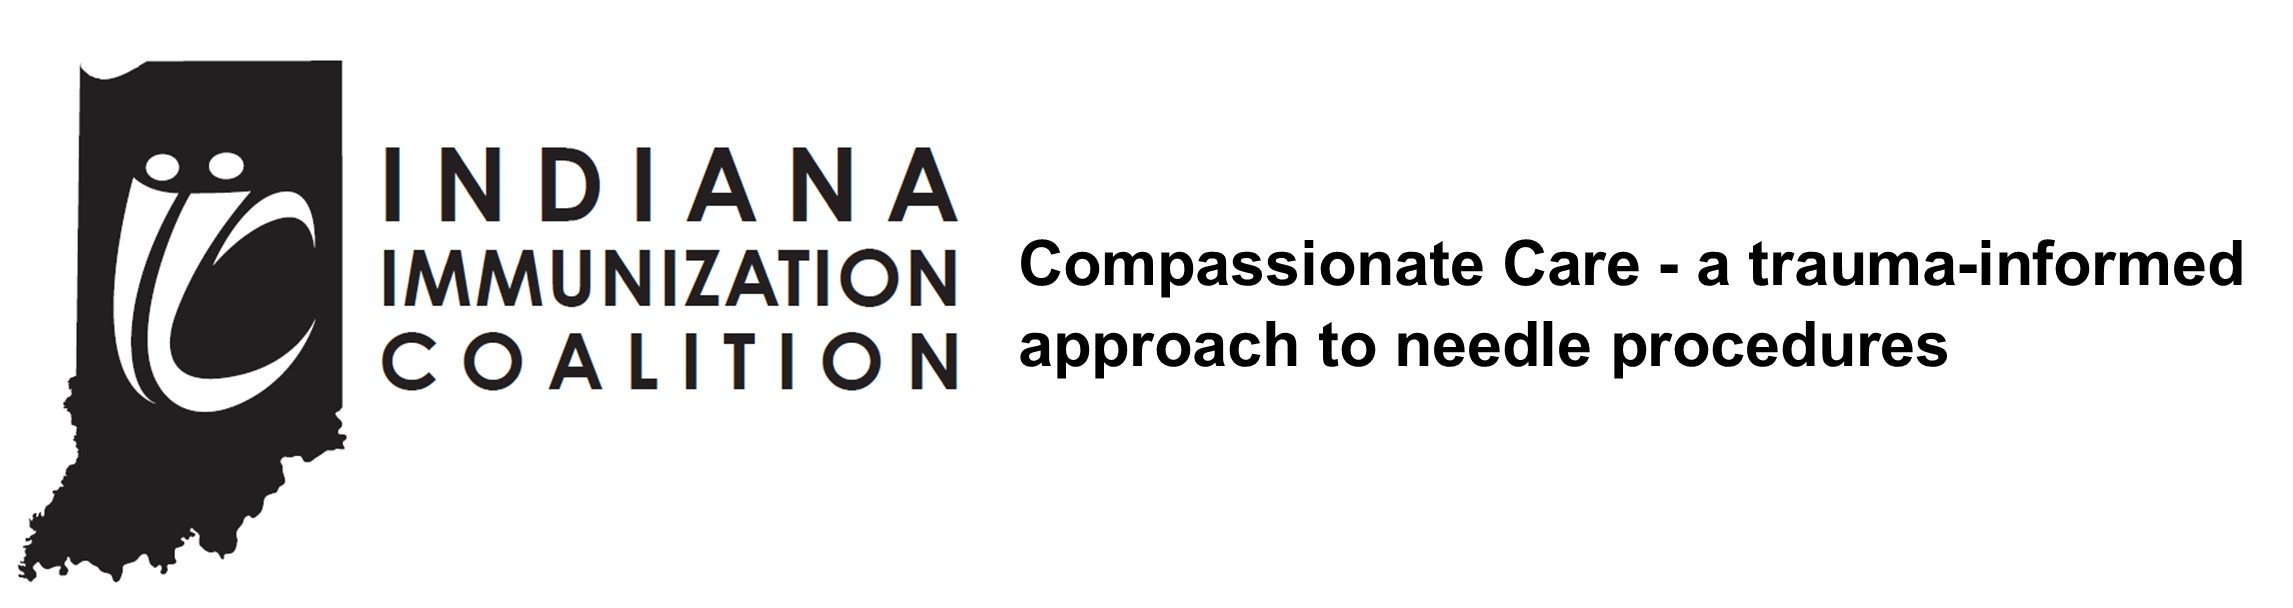 Compassionate care - a trauma-informed approach to needle procedures Banner